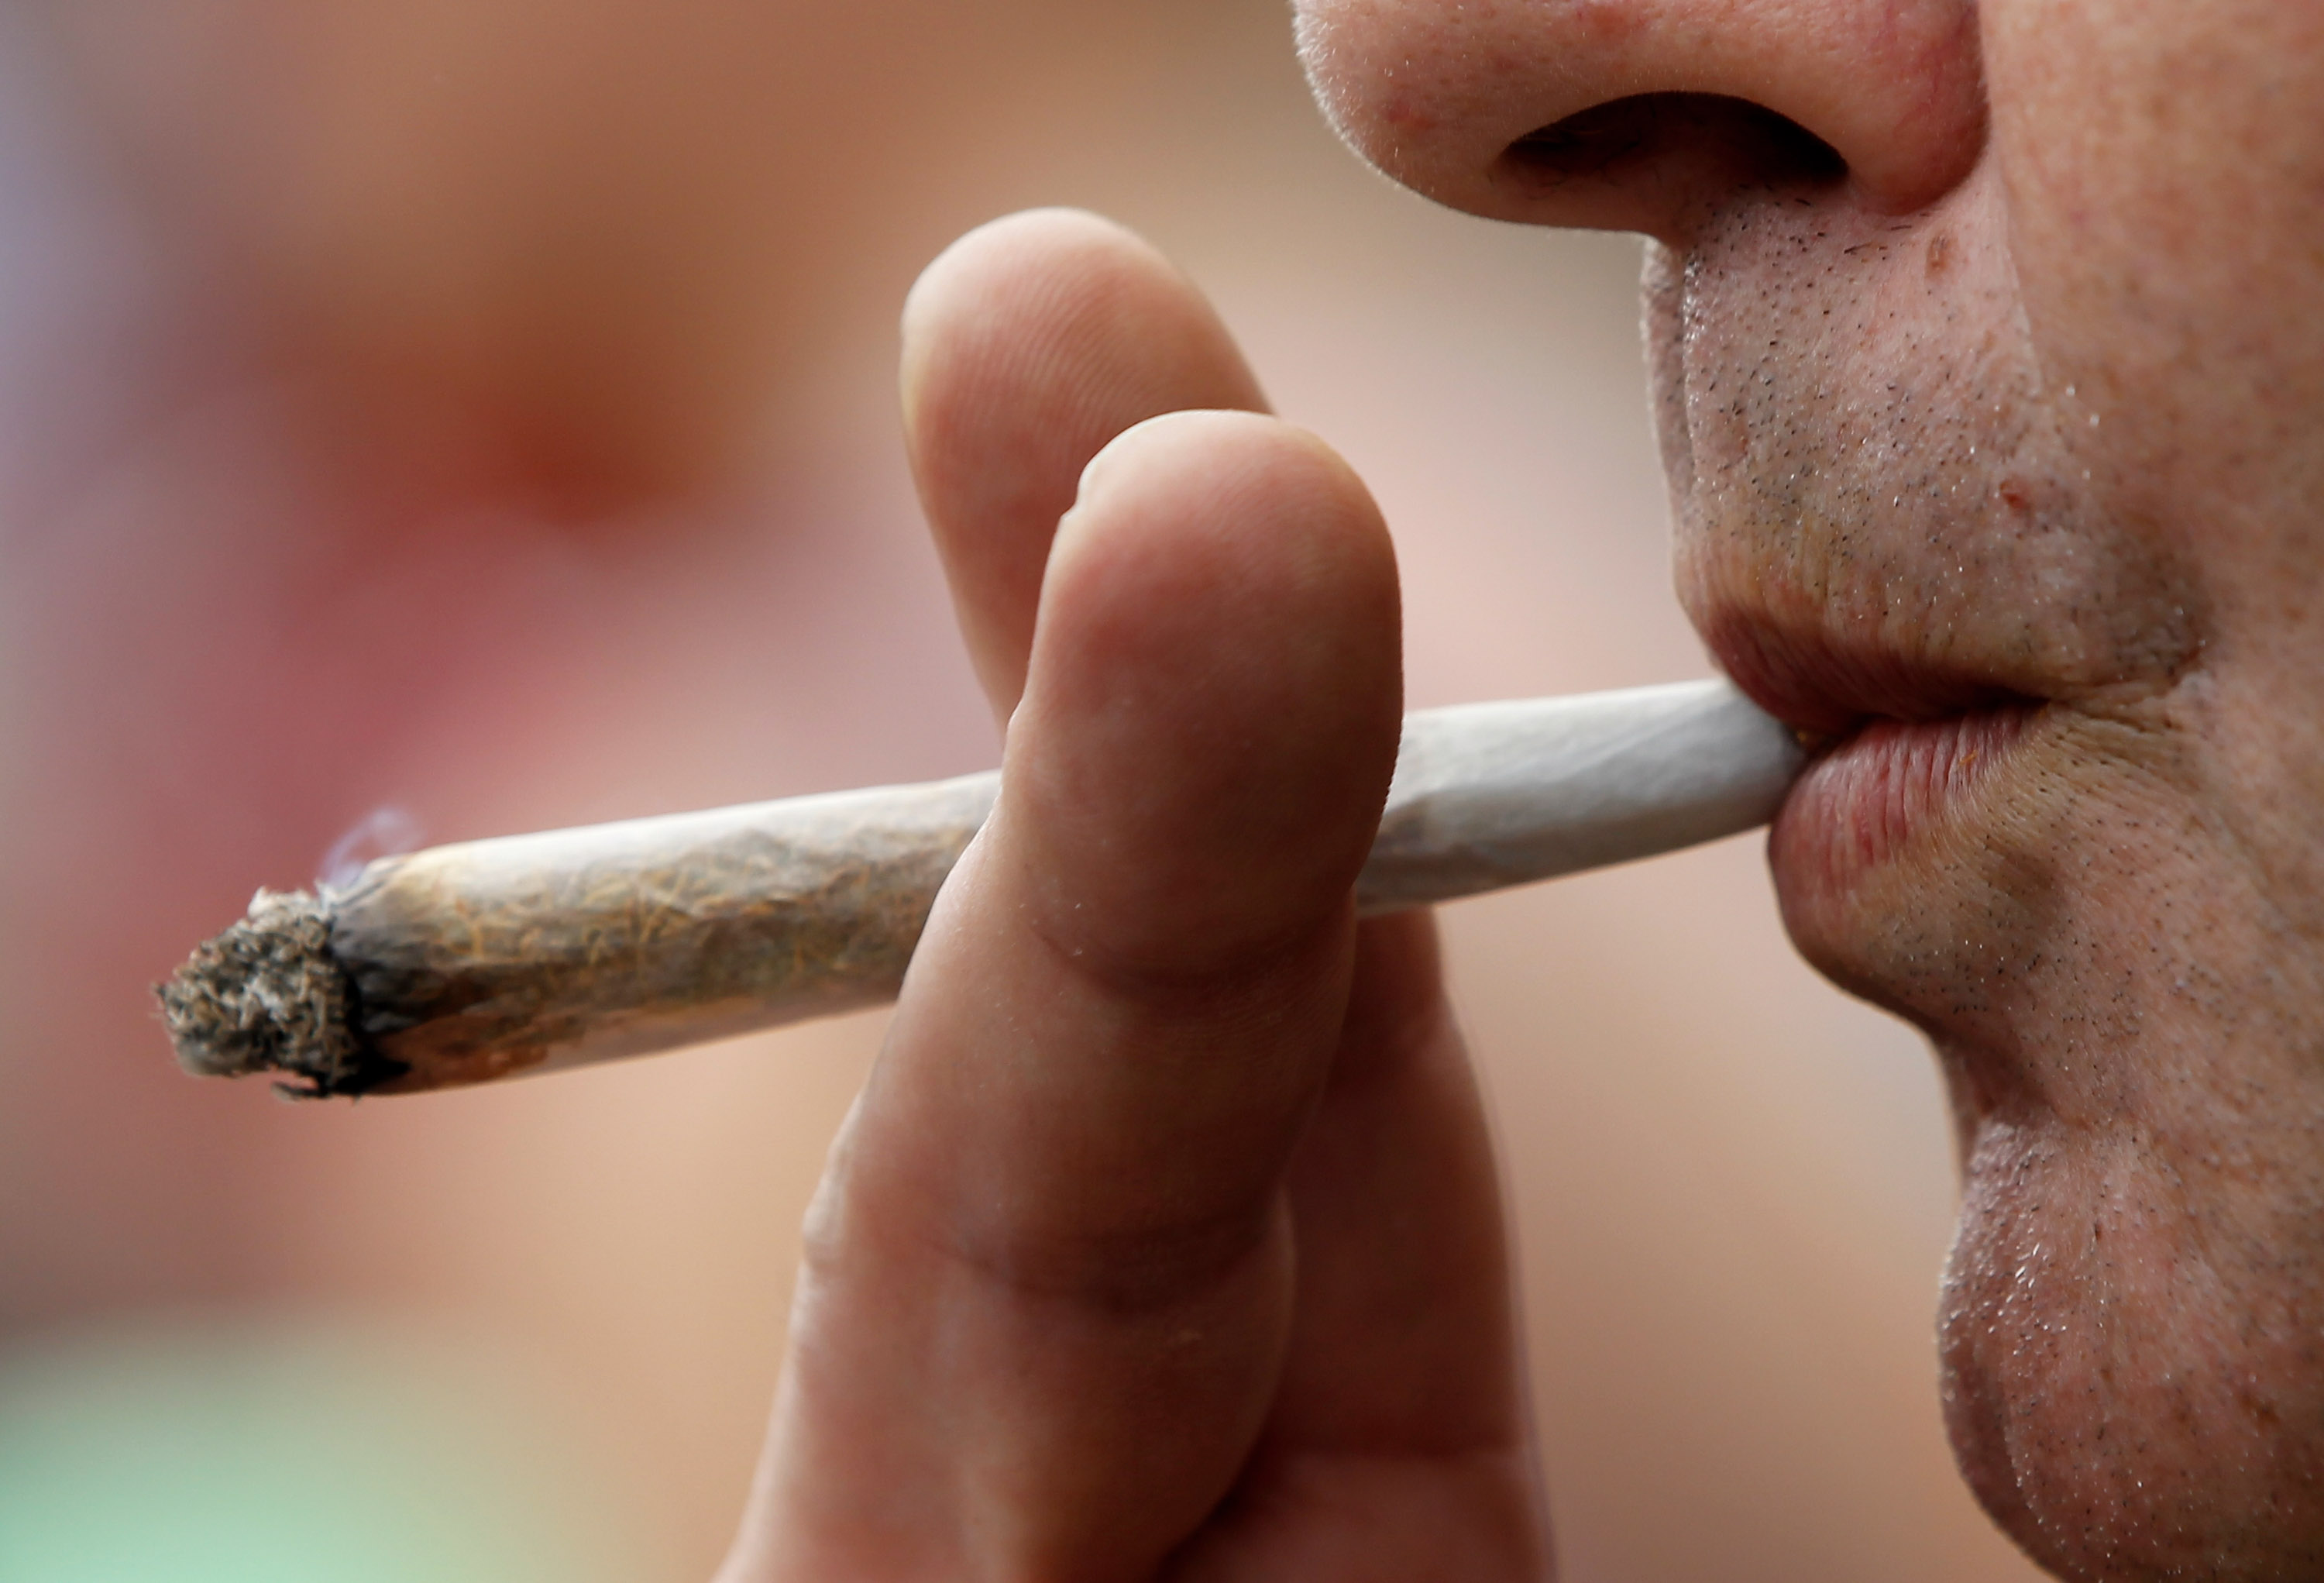 What's The Safest Way To Smoke Pot? These Ways Might Be Best